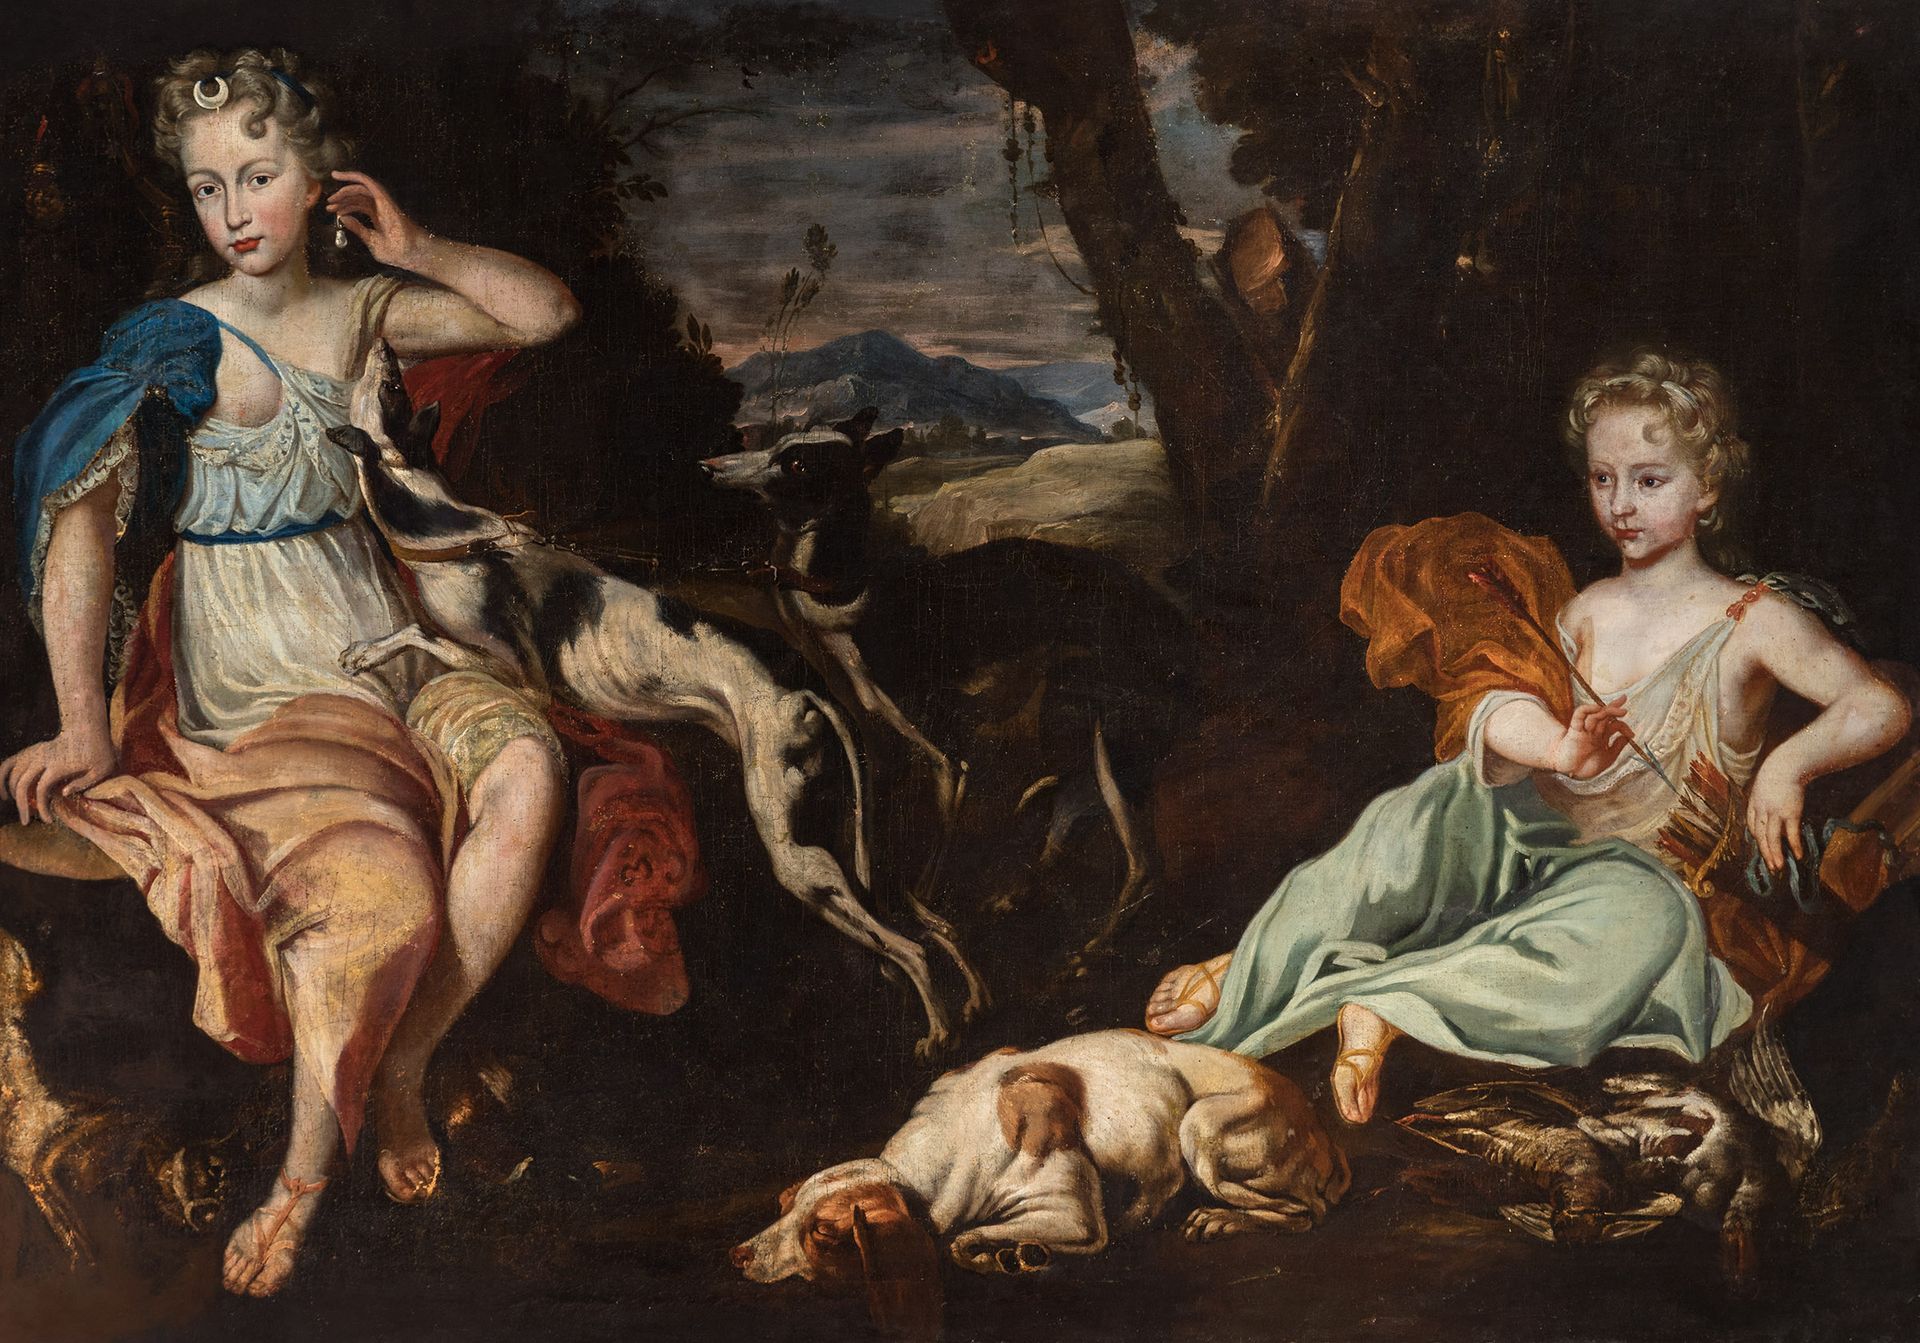 Null Italian school; circa 1690.
"Portrait of girls as Diana Huntress and nymph"&hellip;